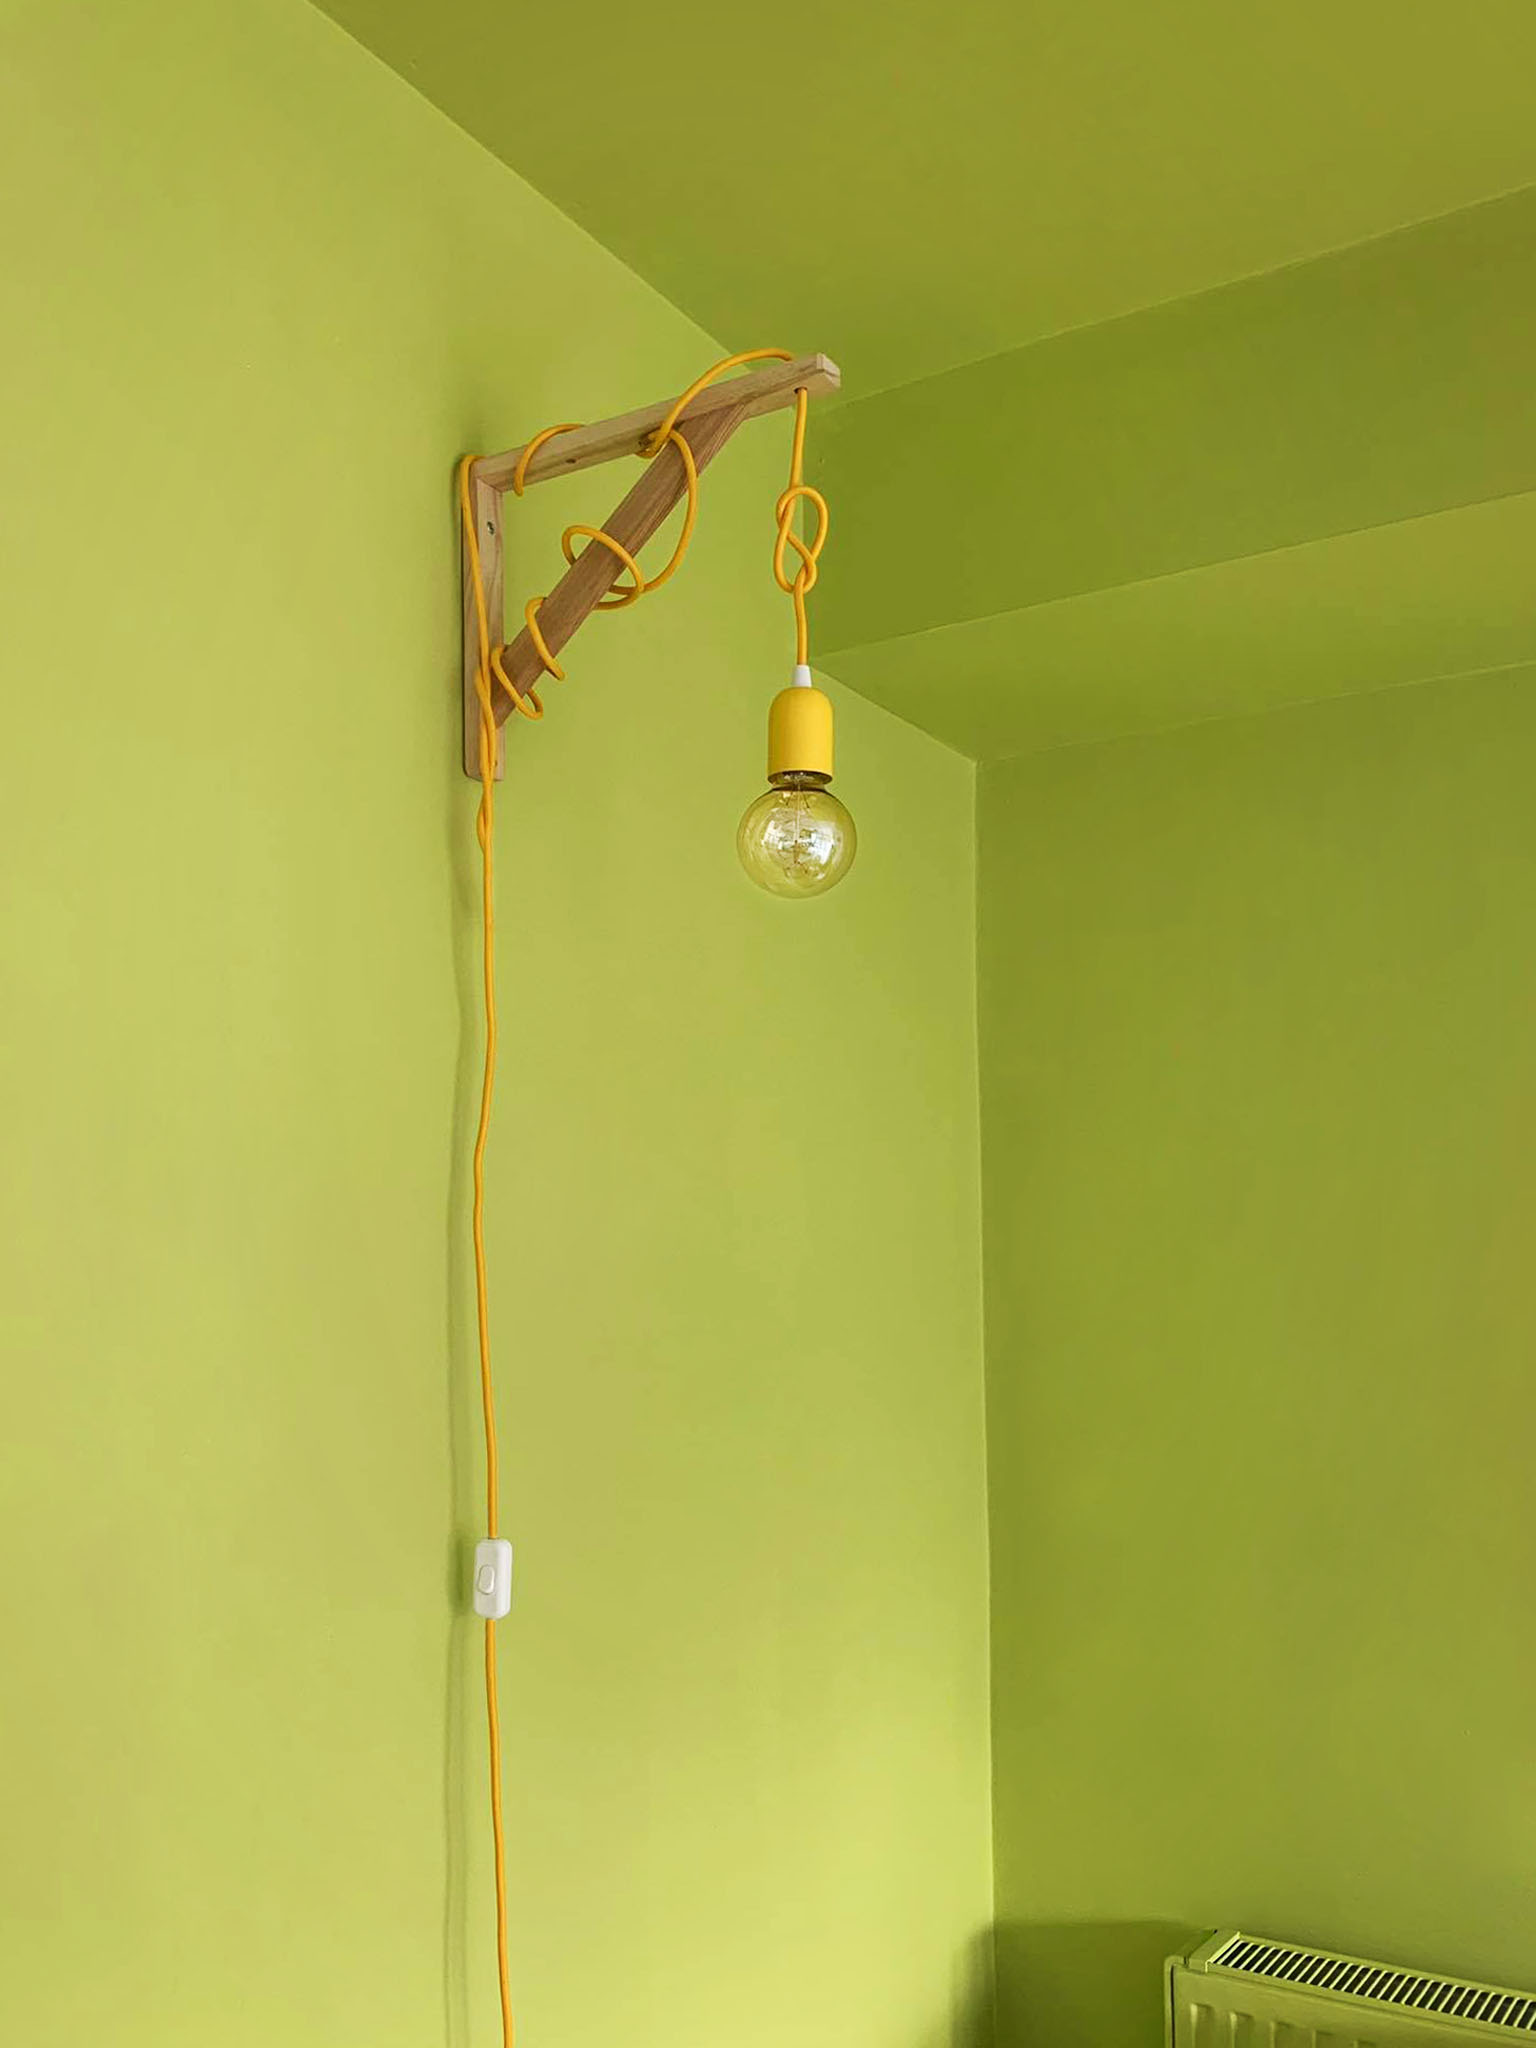 Bright green color block separating the space with a bright yellow hanging cable lamp